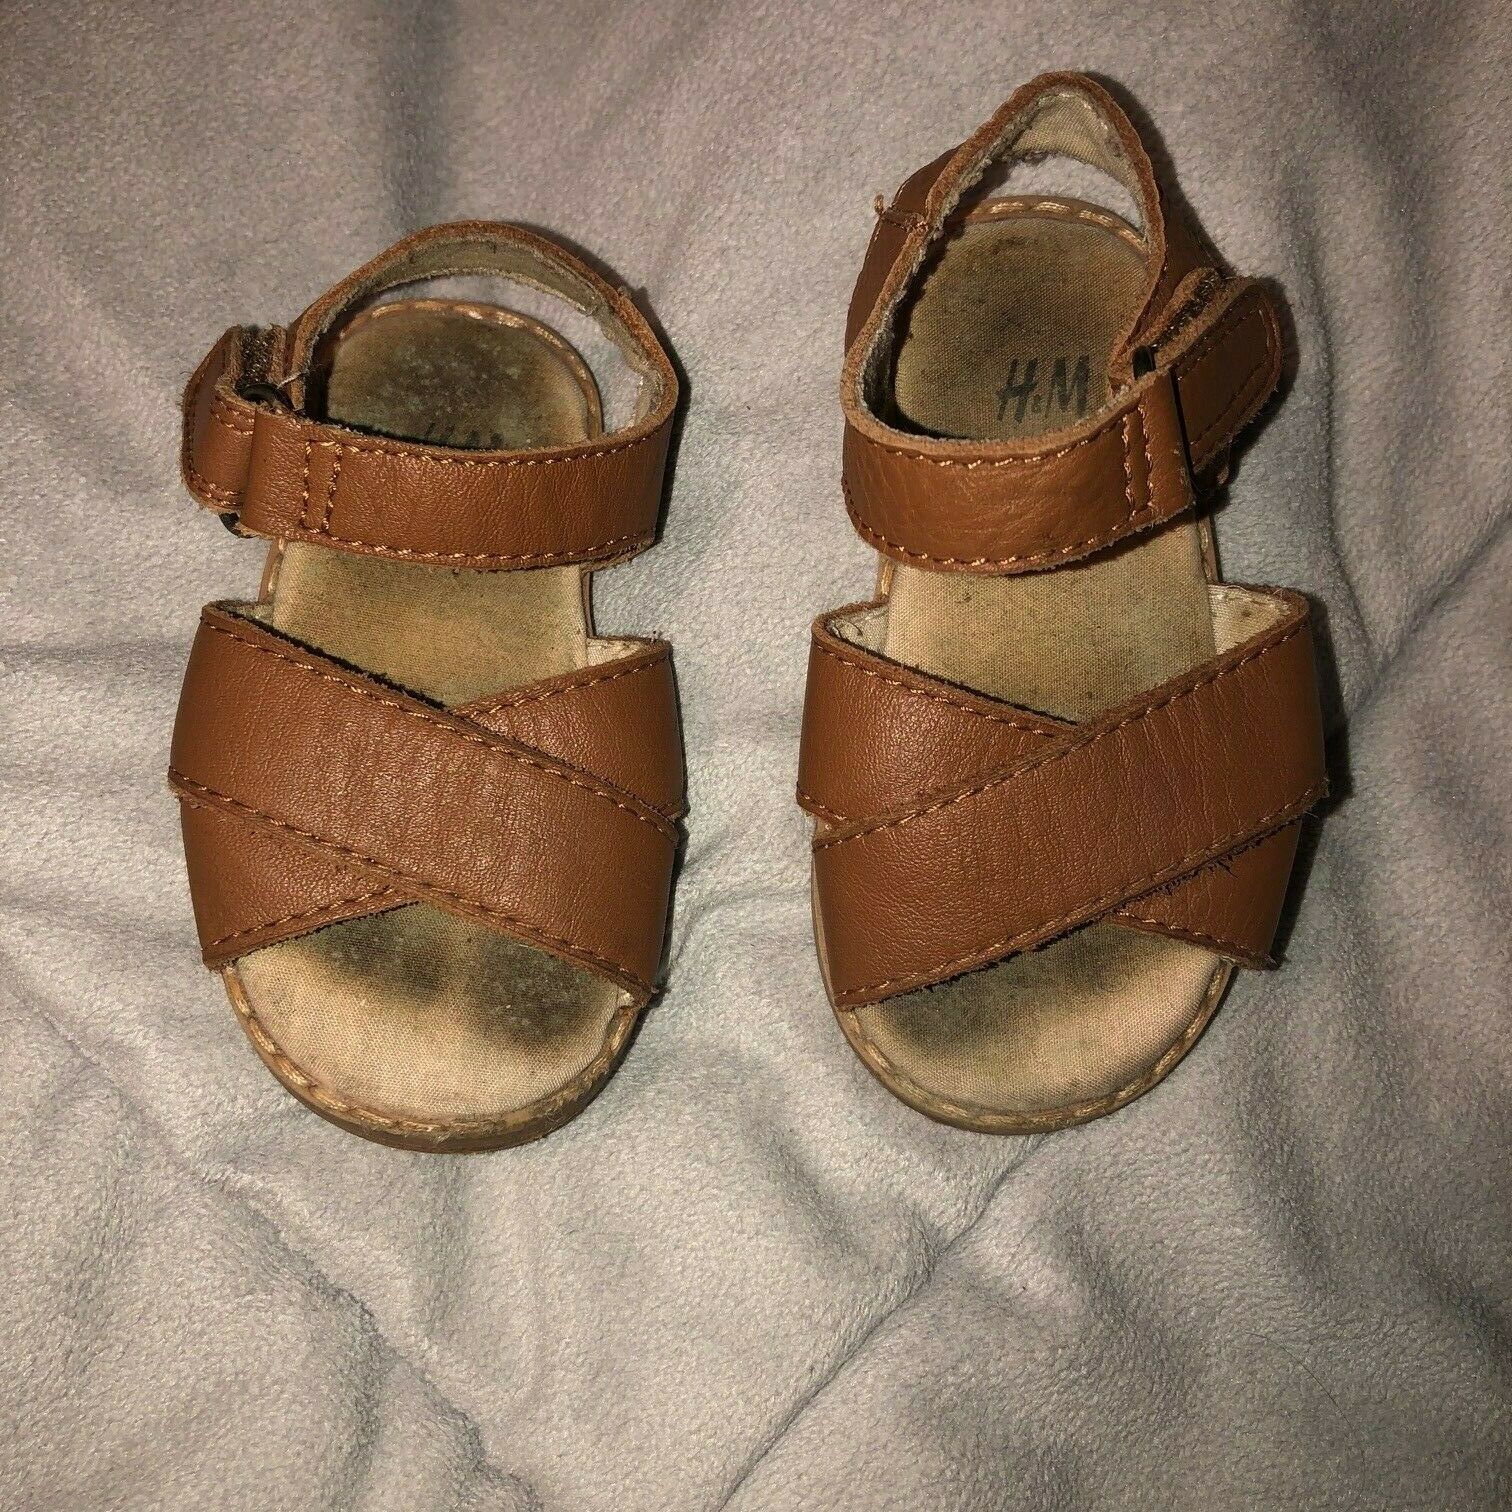 H&M Baby Girl’s Sz 2.5-3.5 Sandals with Straps Hook and Loop Closure - $3.95